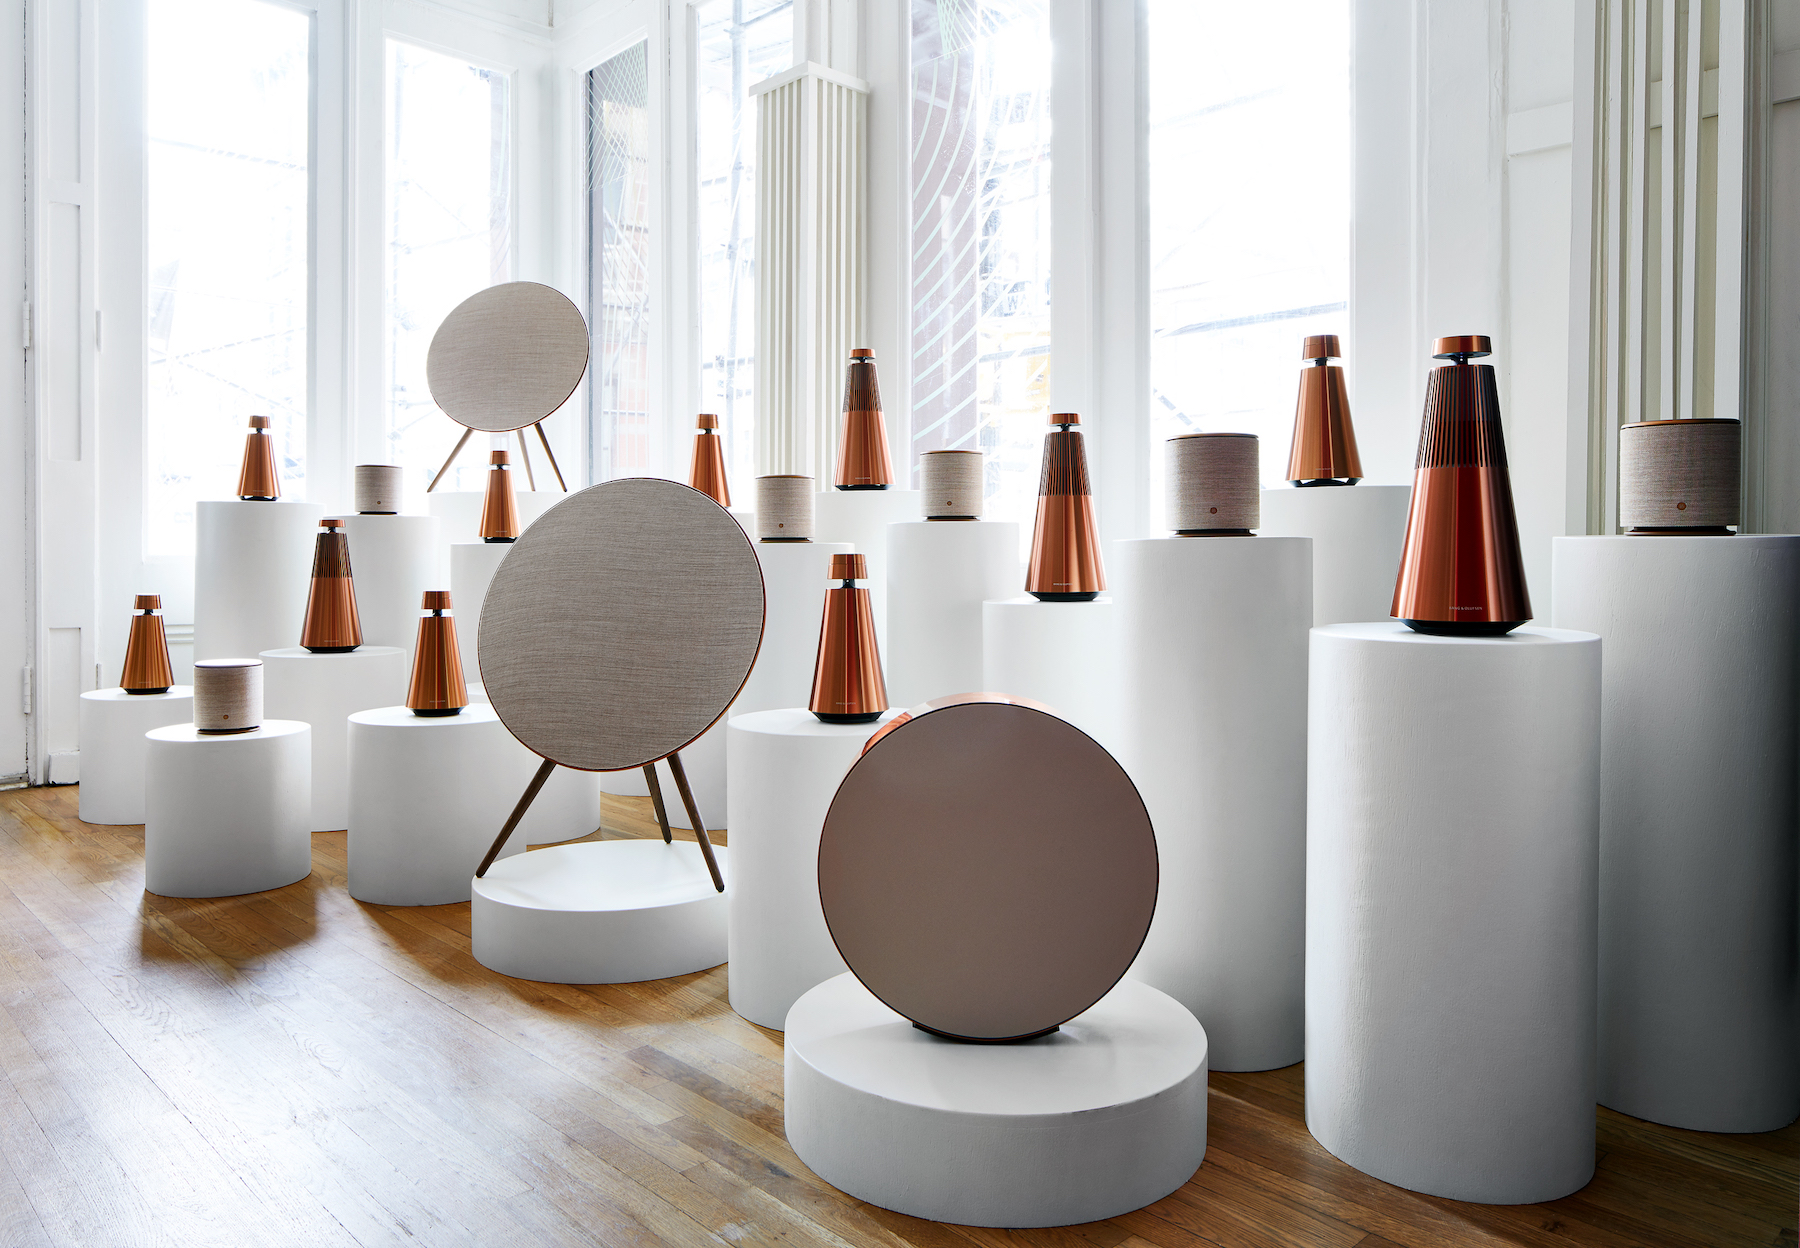 Bang & Olufsen Plants a Flagship in SoHo – Visual Merchandising and Store  Design